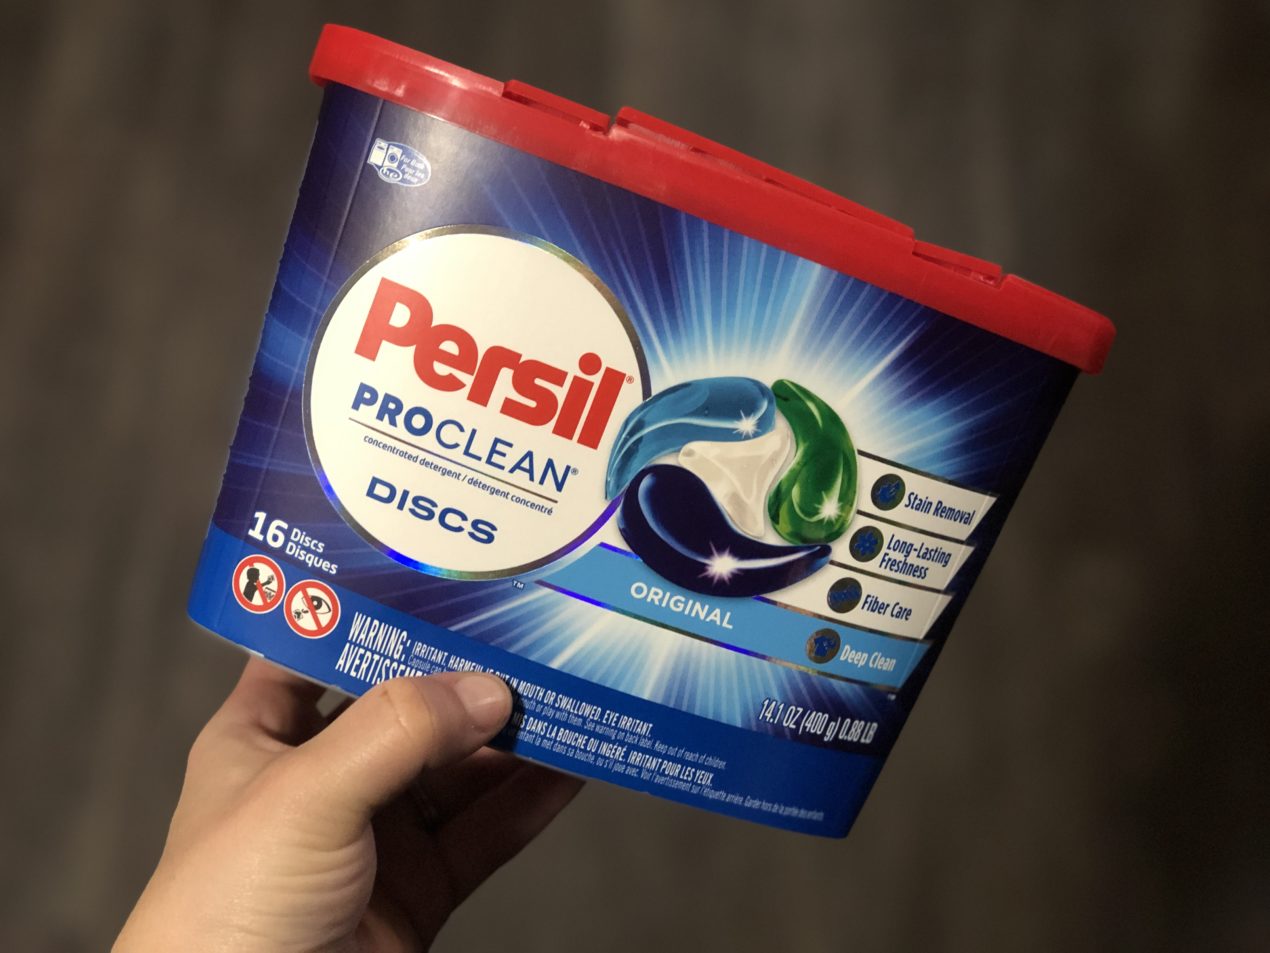 New $2 00 Persil Printable Coupon   Deals My Momma Taught Me